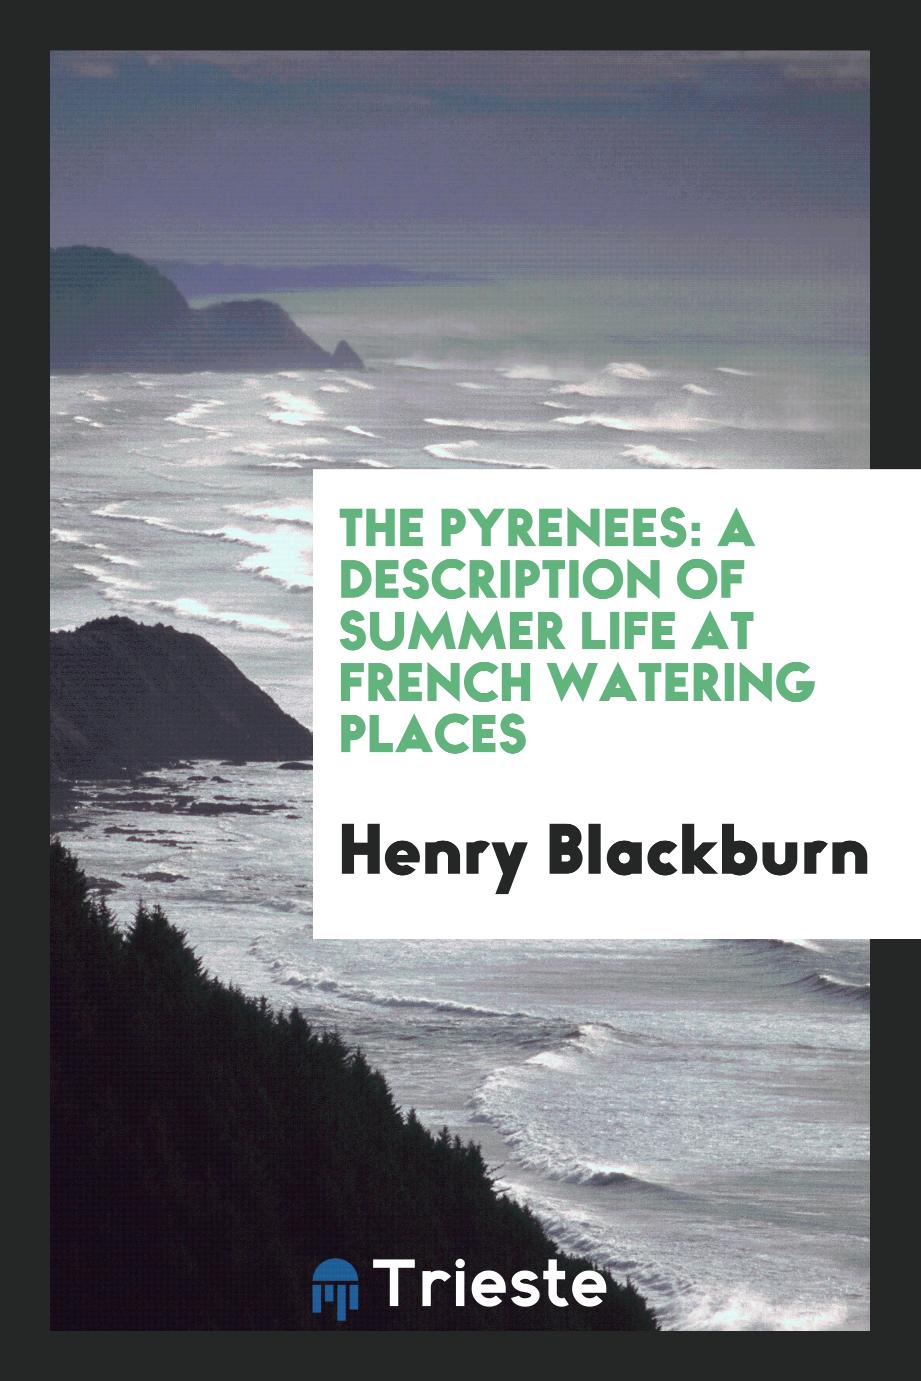 The Pyrenees: A Description of Summer Life at French Watering Places